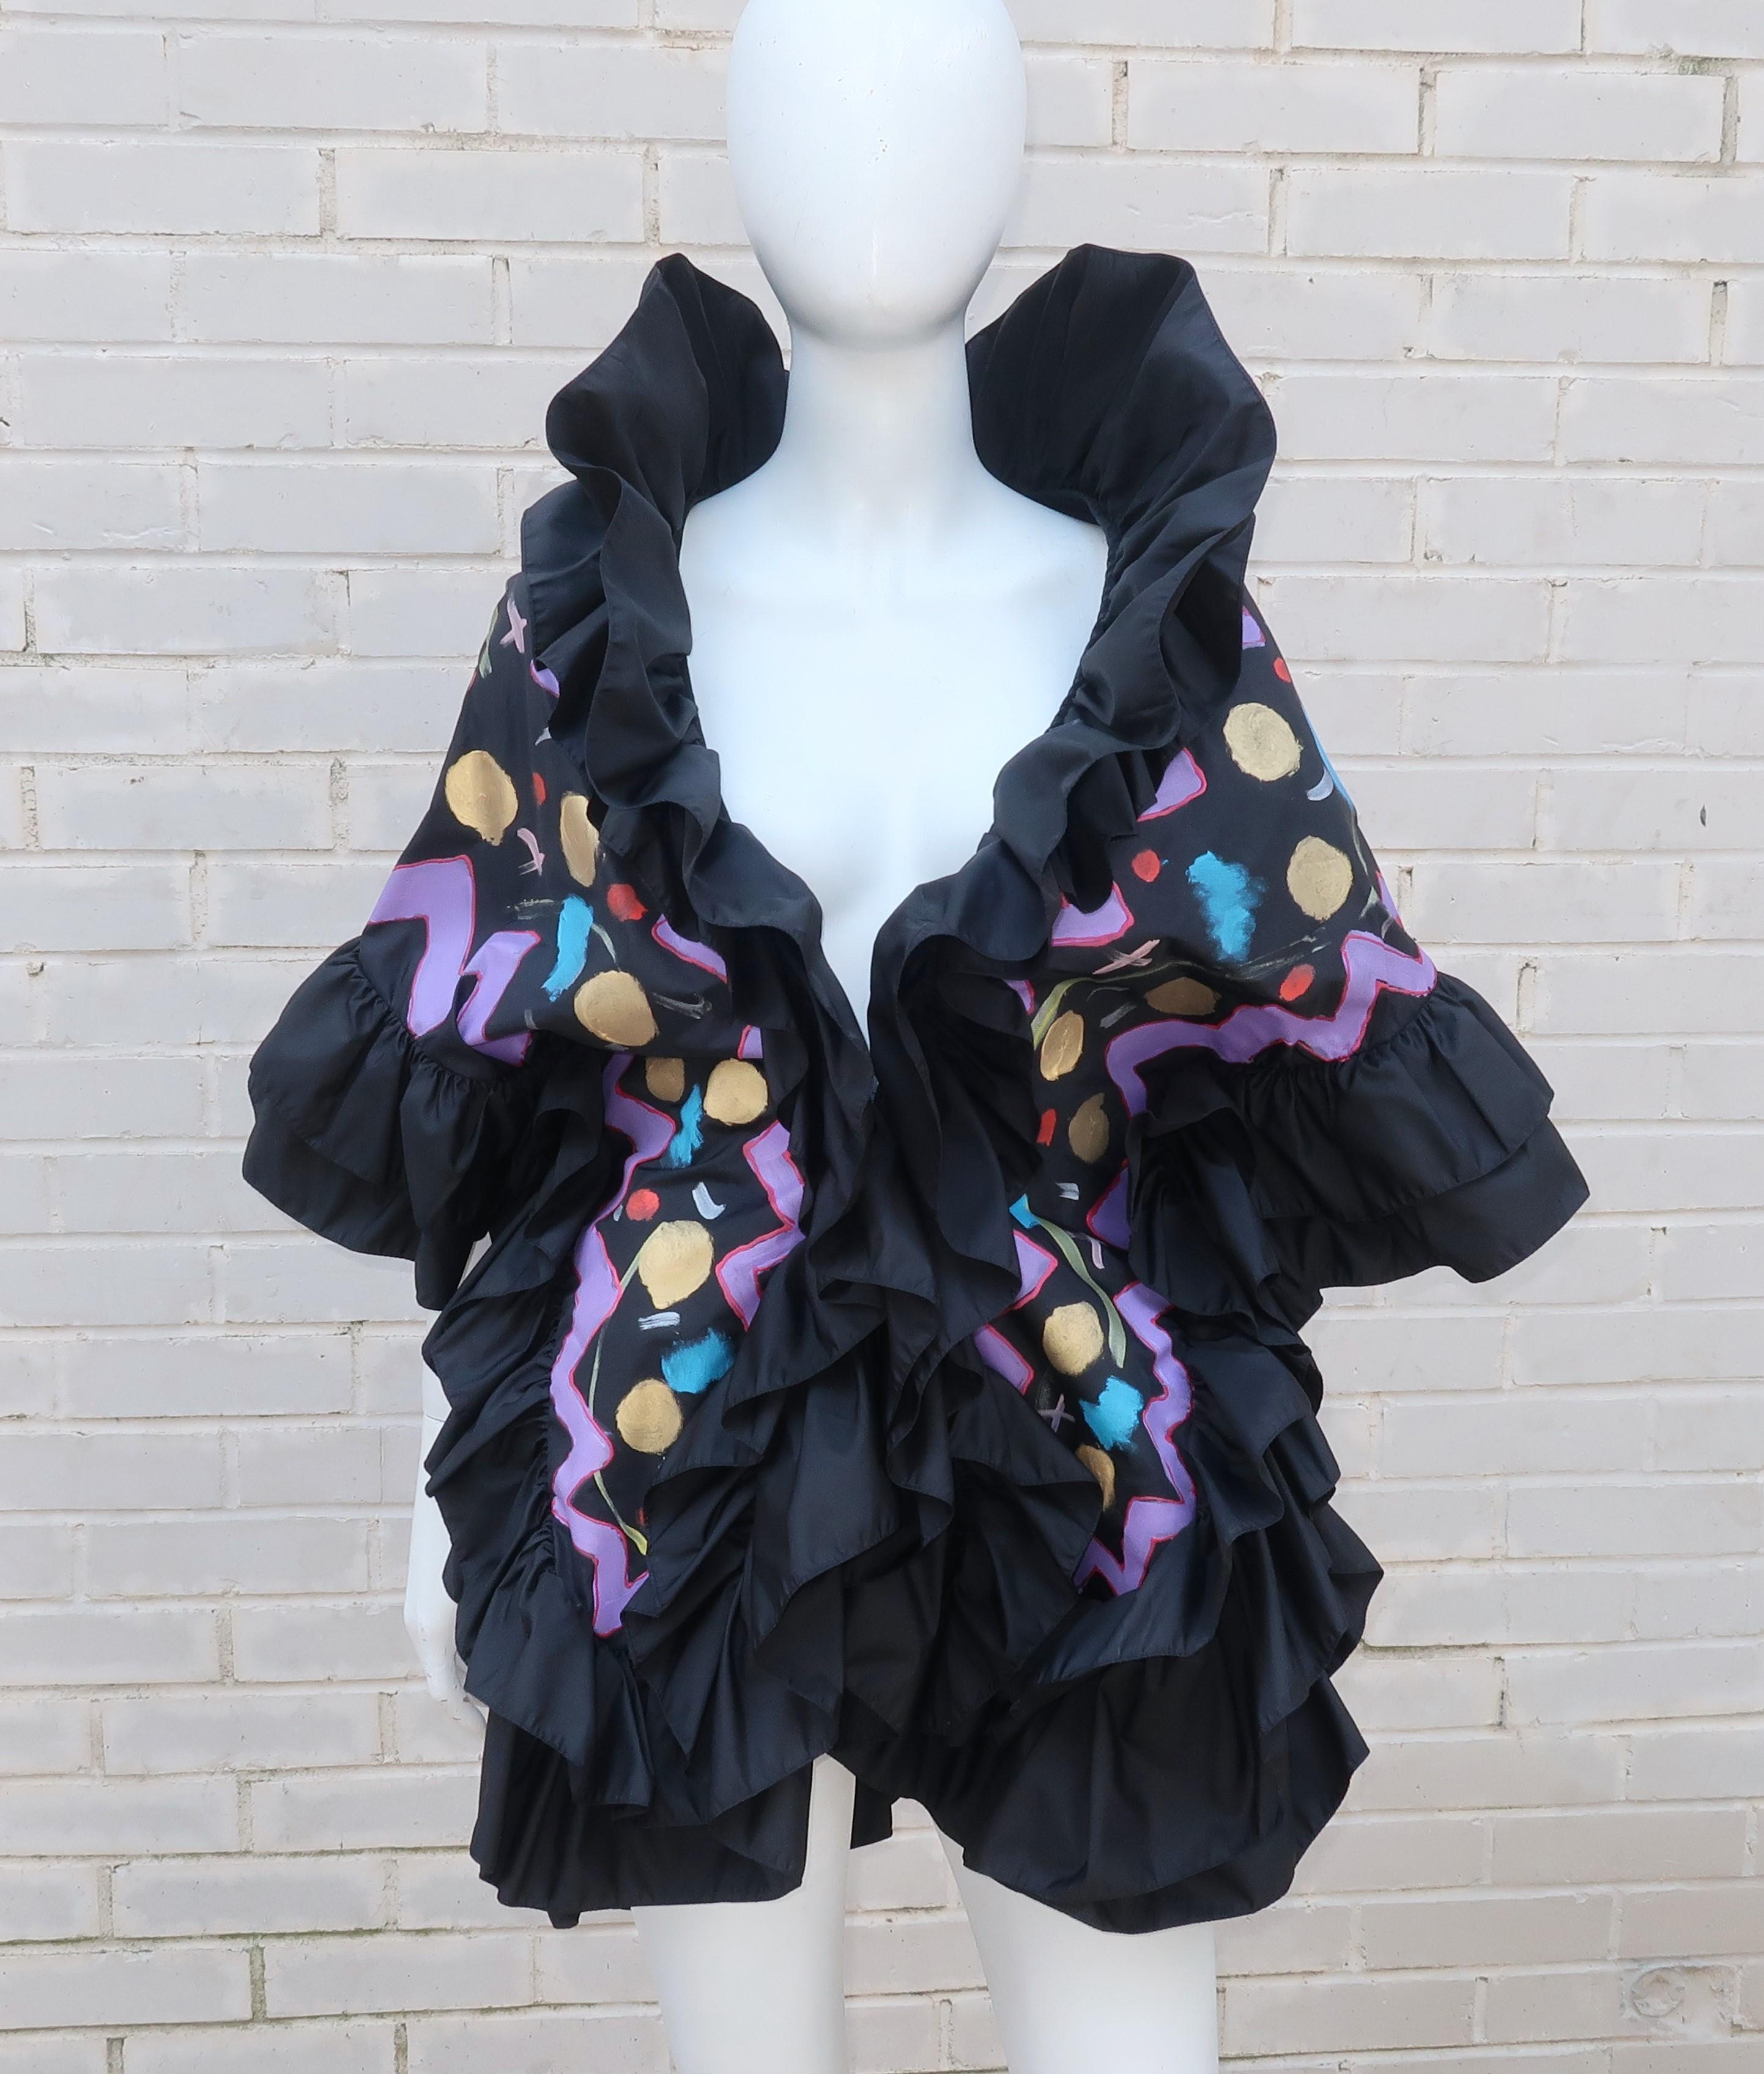 This taffeta wrap looks like a party all on its own.  The black background is the perfect canvas for a hand painted celestial style design featuring shades of gold, silver, electric blue, purple, peach and red.  The jacket silhouette is accented by